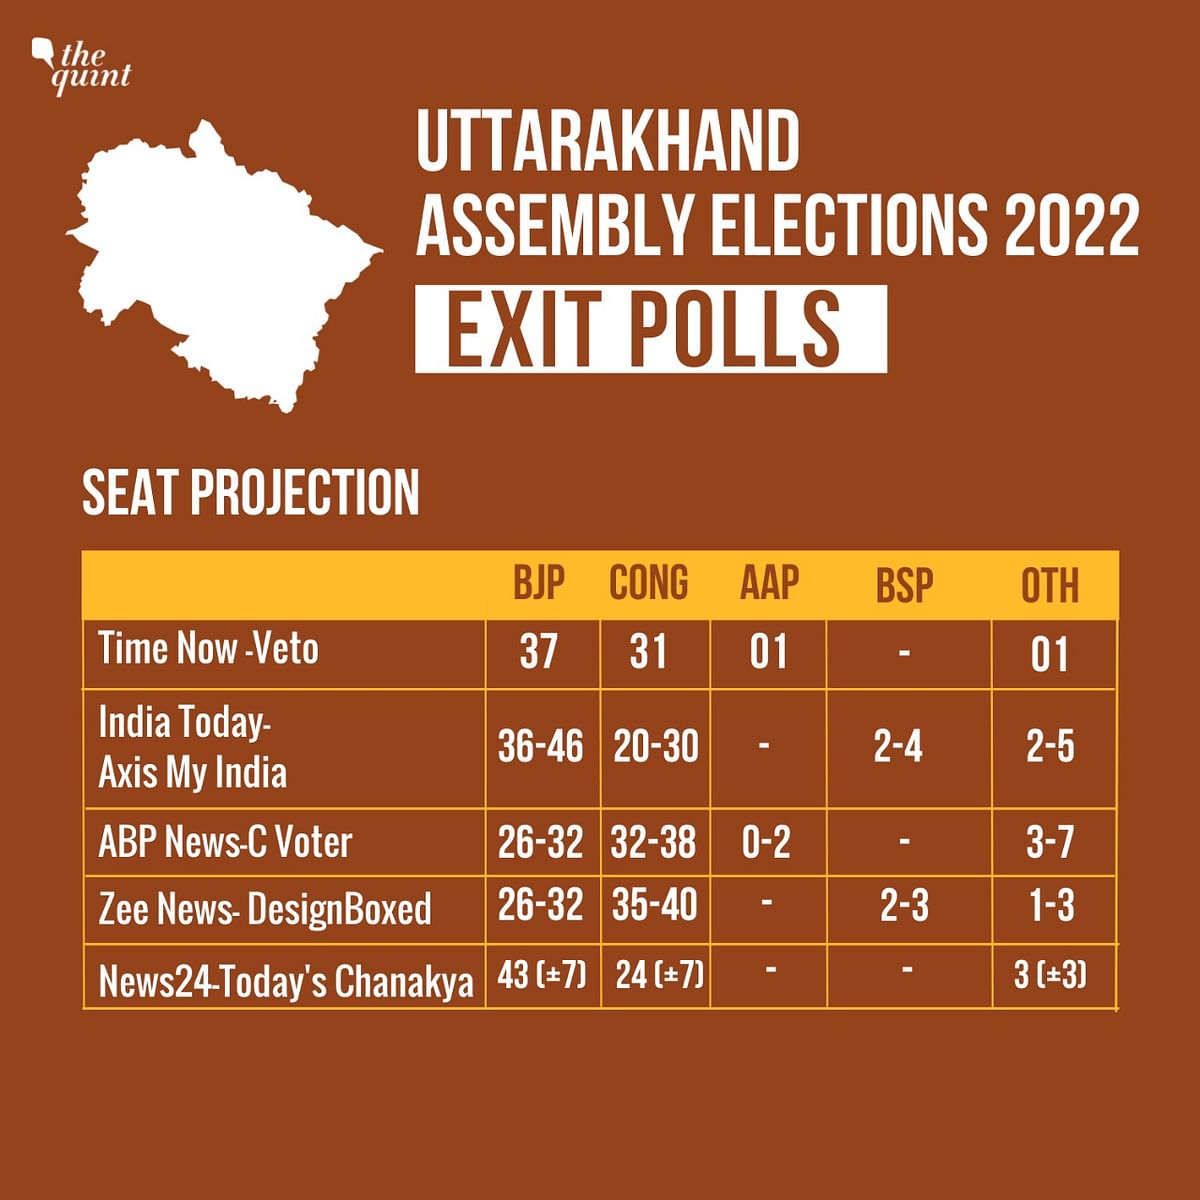 Both ABP-CVoter and Zee-DesignBoxed polling agencies predicted a spare majority for the Congress in Uttarakhand.